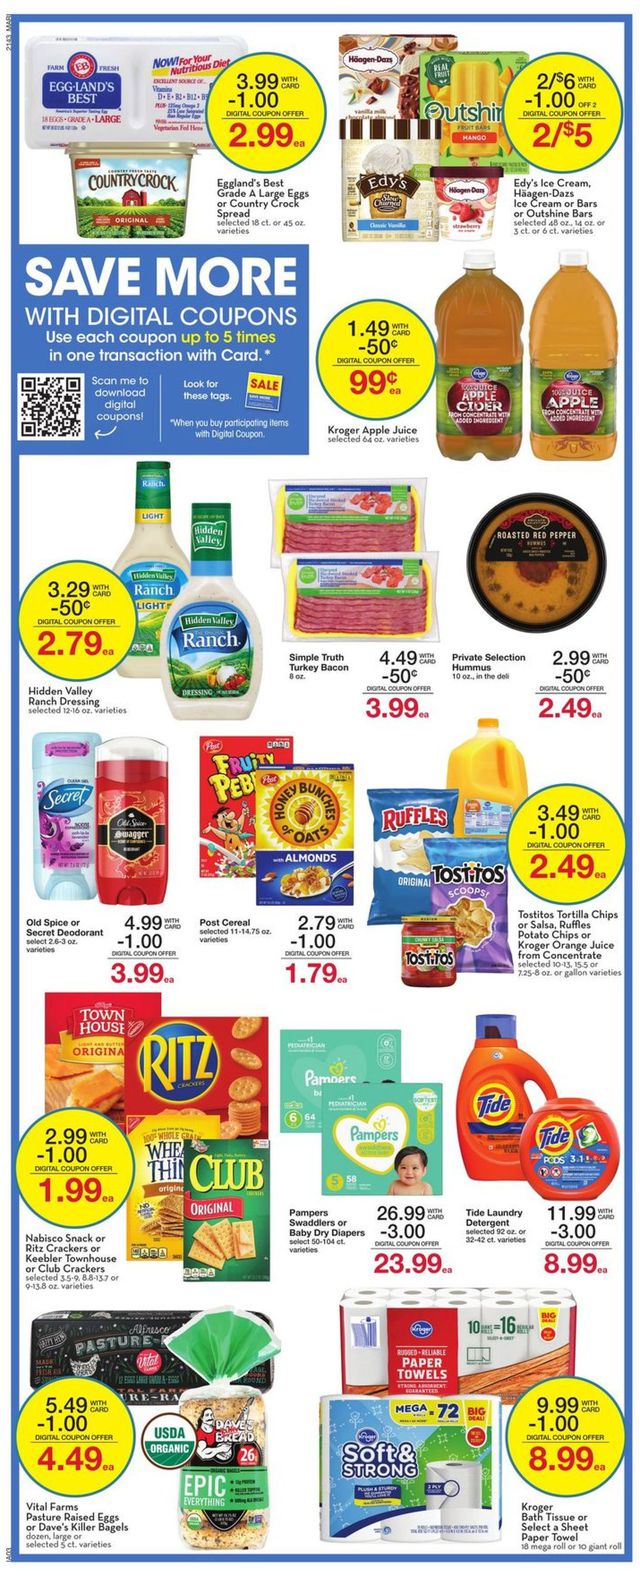 Mariano’s Ad from 11/26/2021